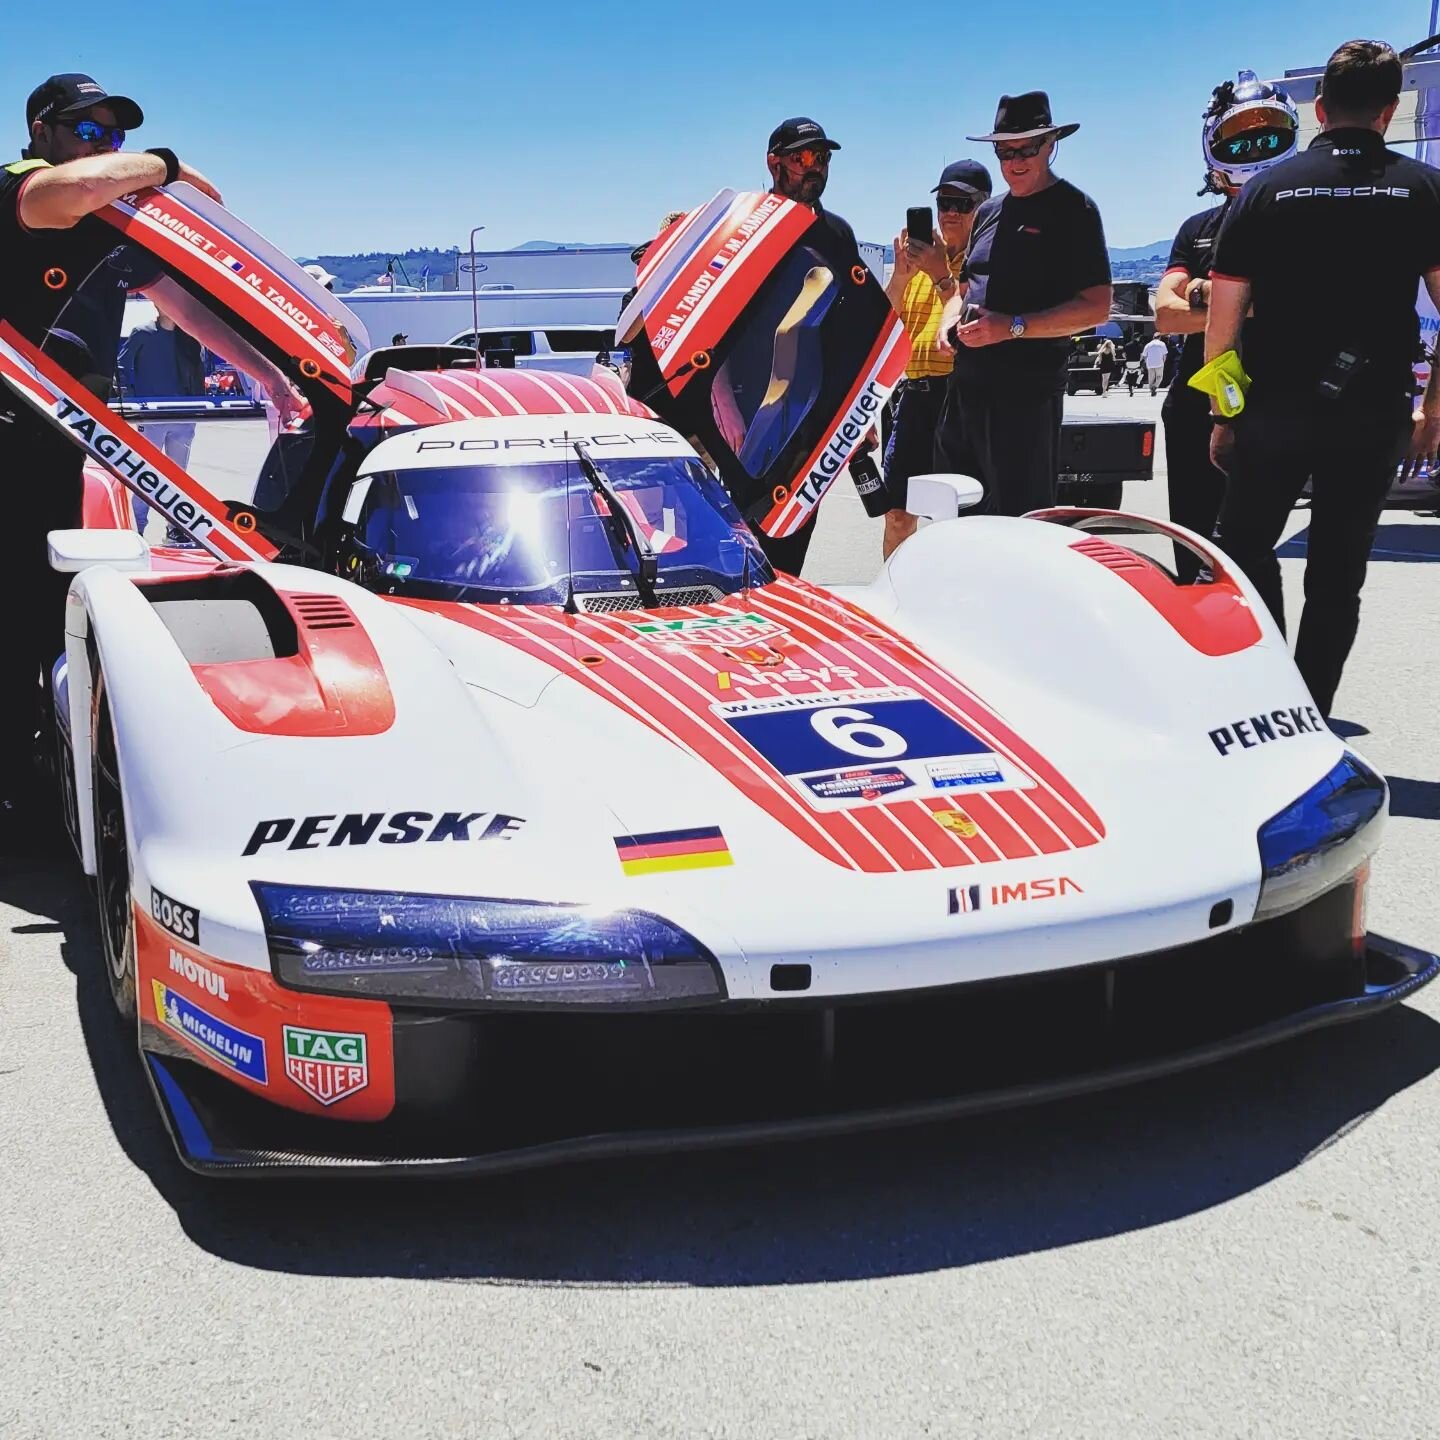 Some sights from qualifying day at @weathertechraceway for the @imsa_racing #motulcoursedemonterey!  Hope you enjoy!  Our full event coverage coming soon! #imsa #racing #amazing #monterey #lagunaseca @motul @motulusa